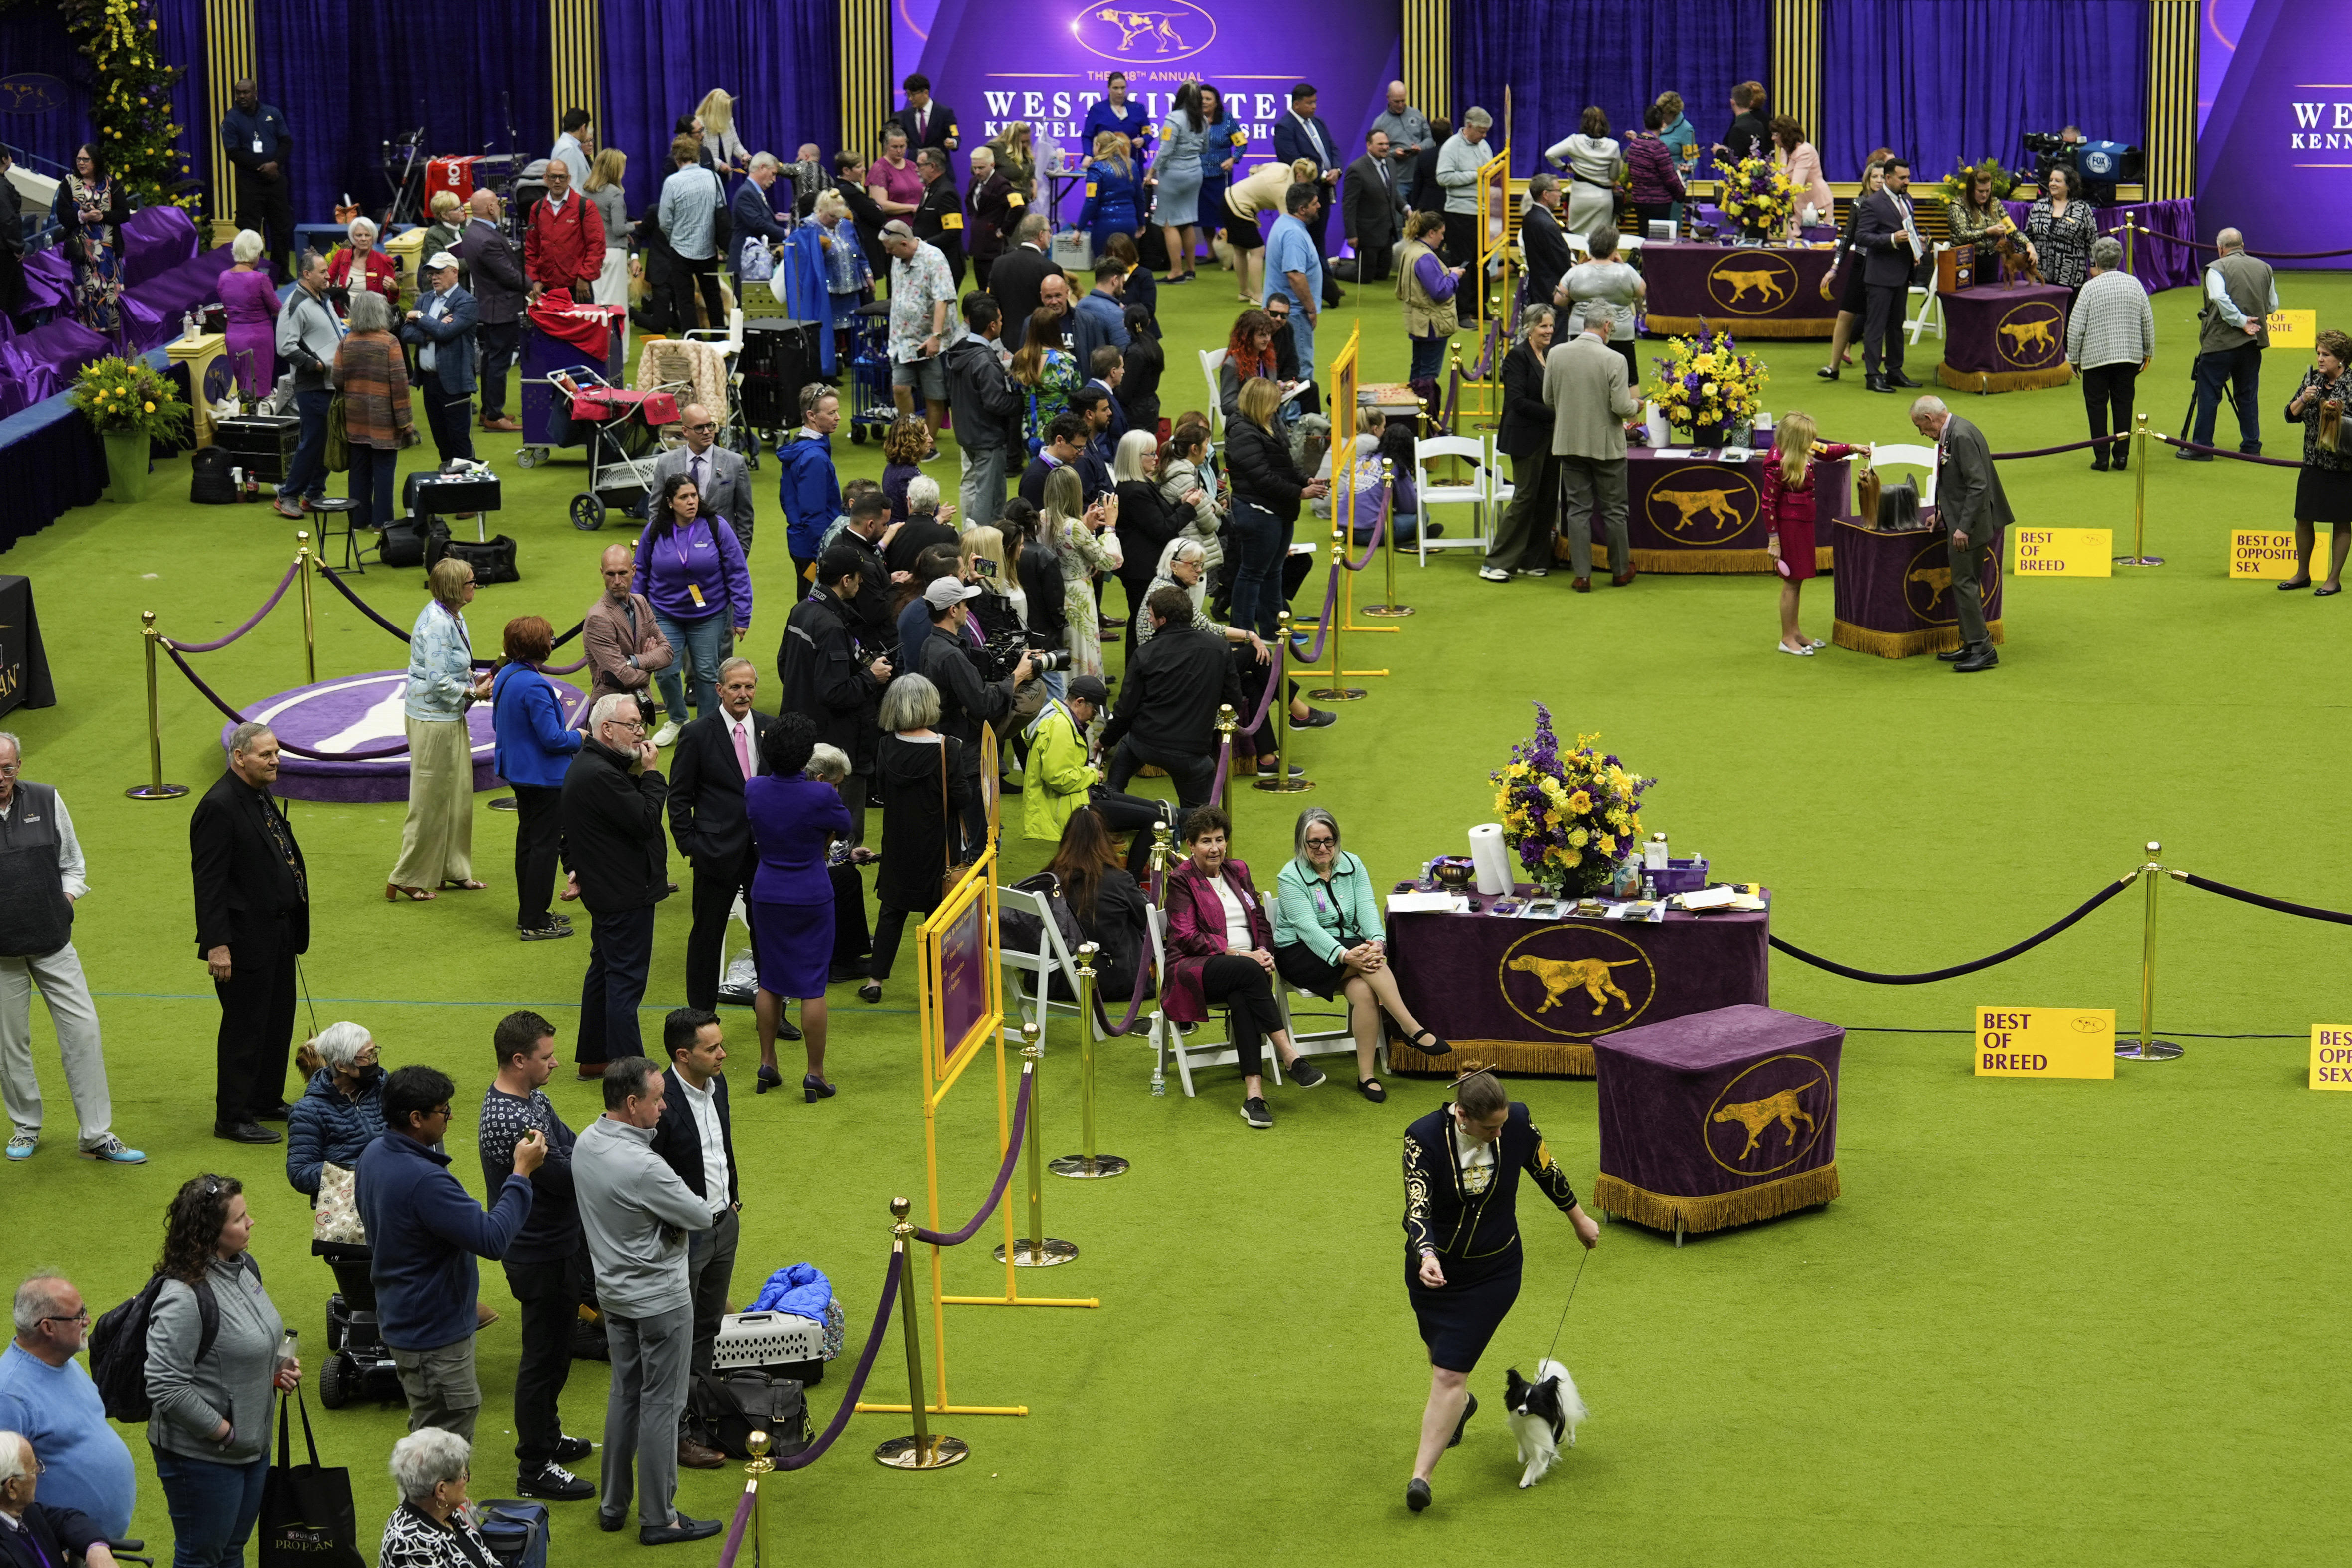 Mixed-breed dog wins Westminster's agility competition for first time